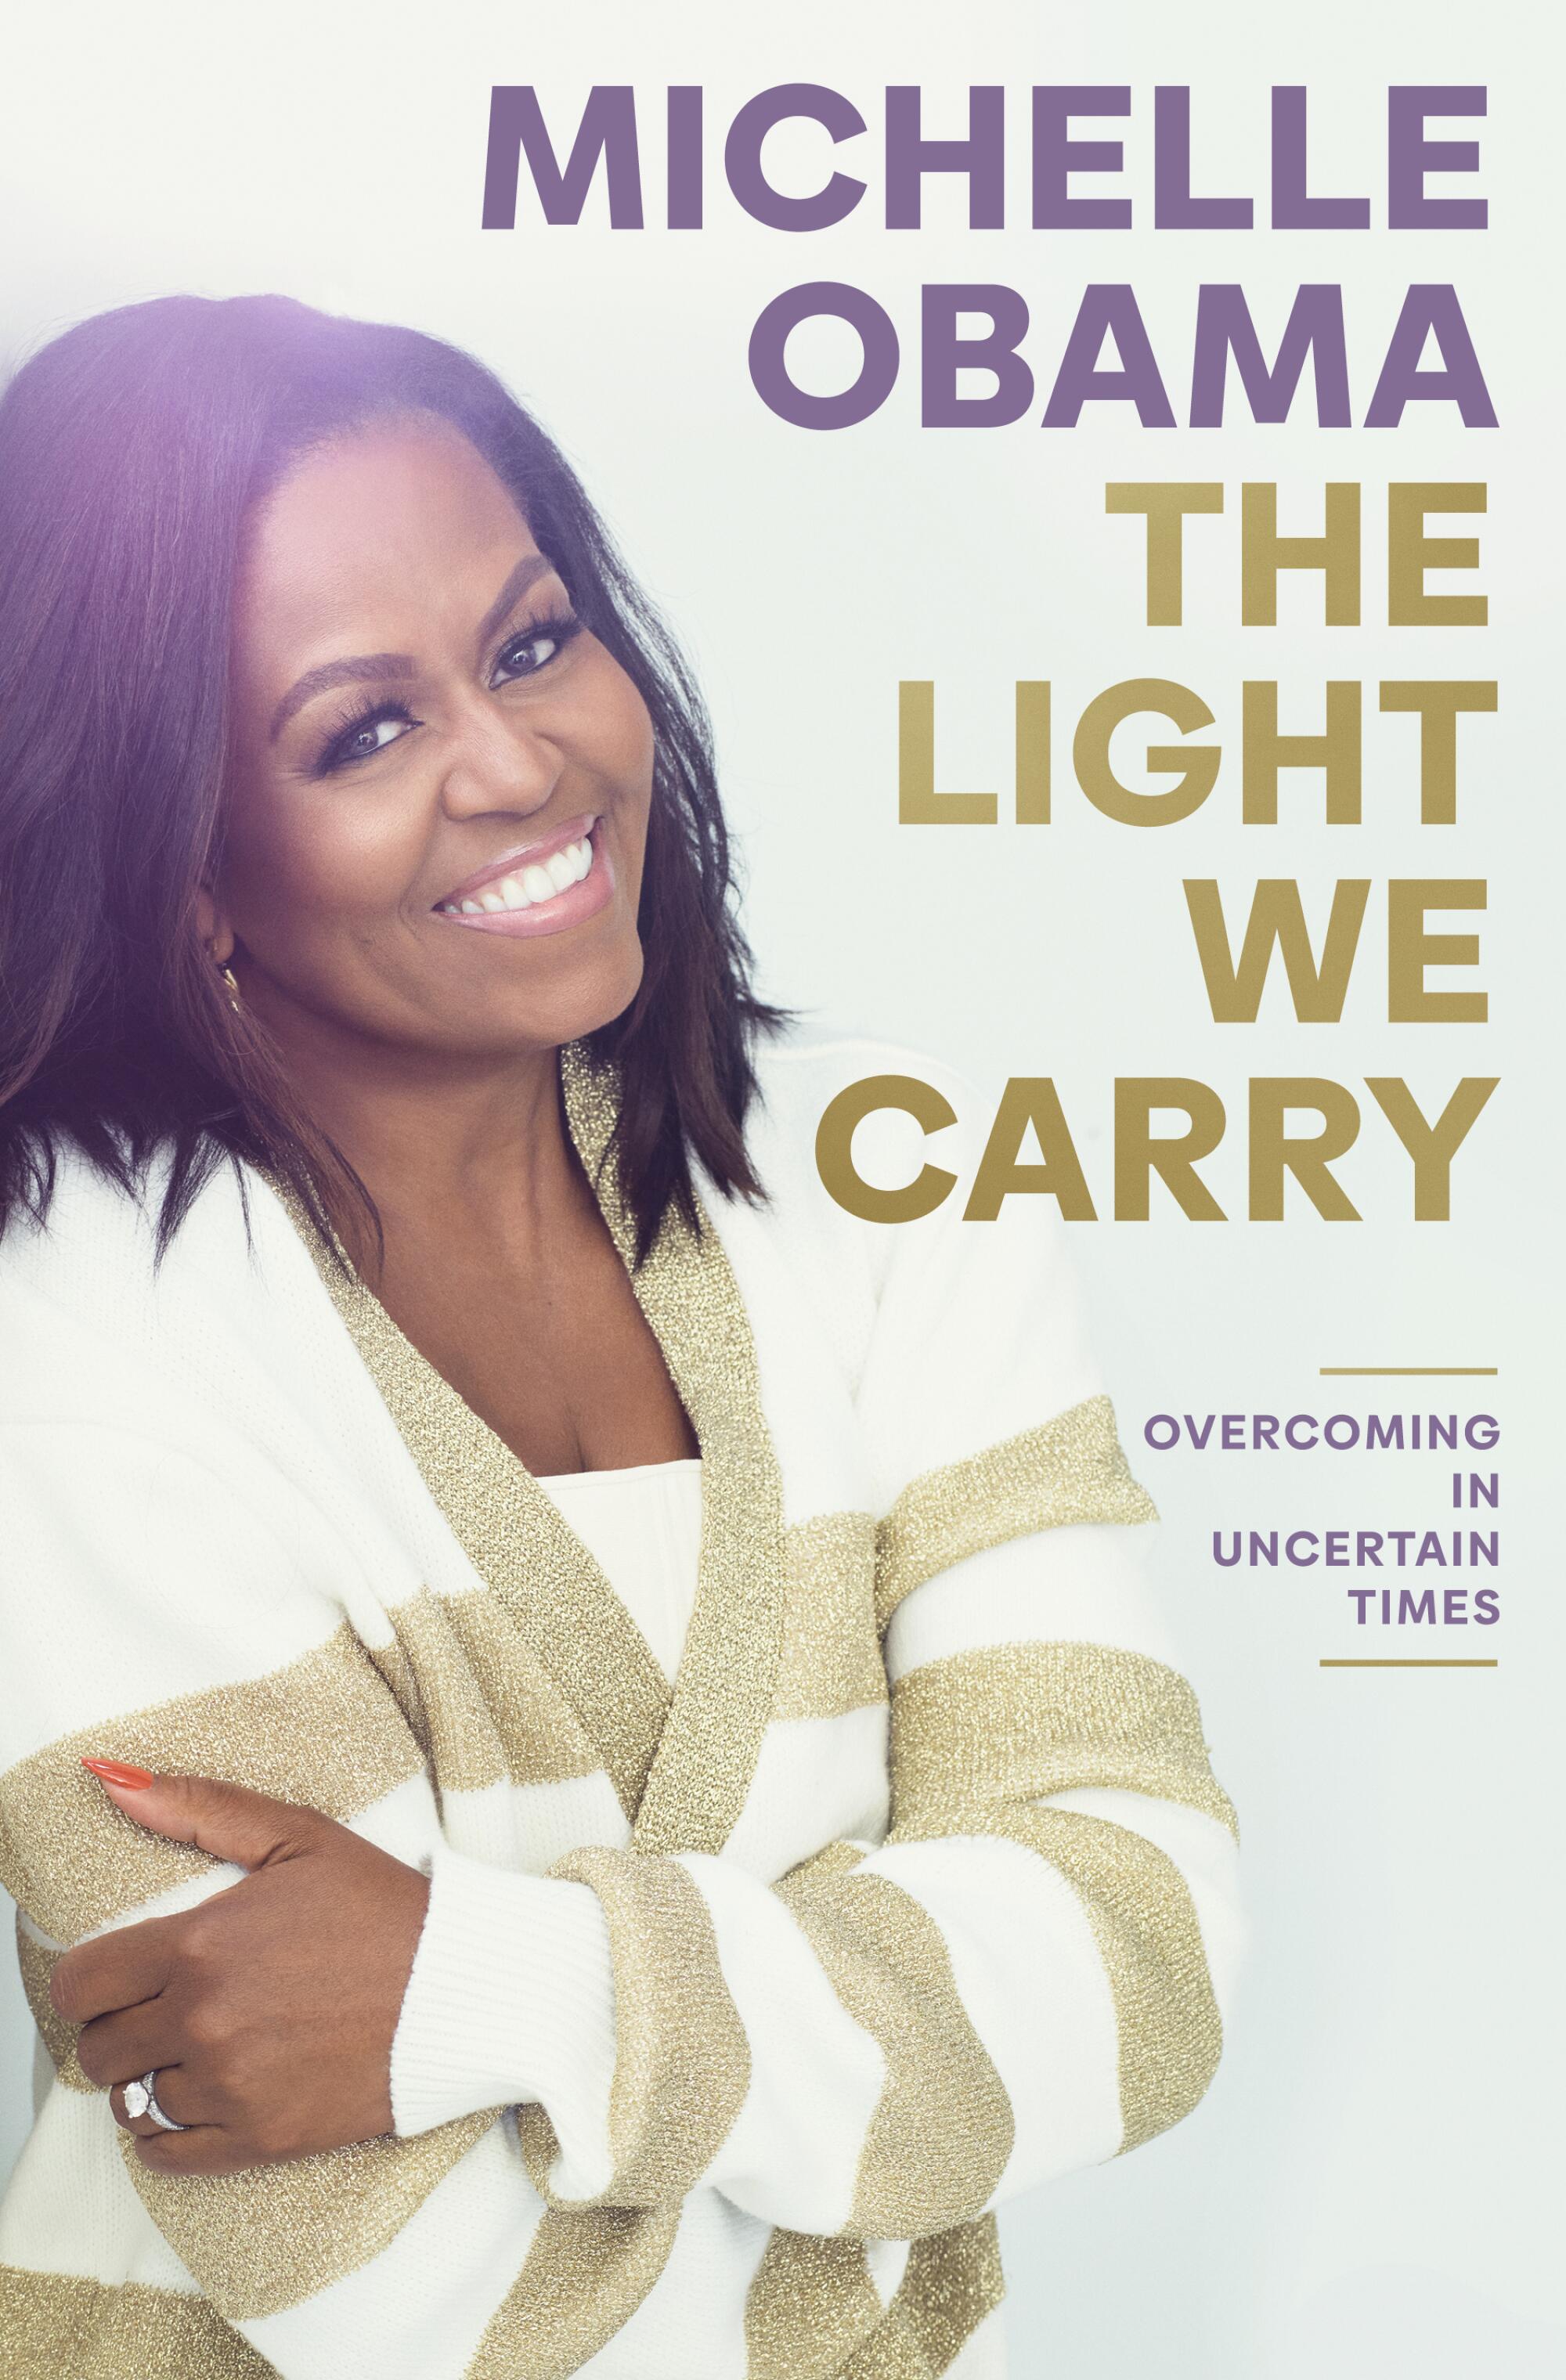 "The Light We Carry" by Michelle Obama